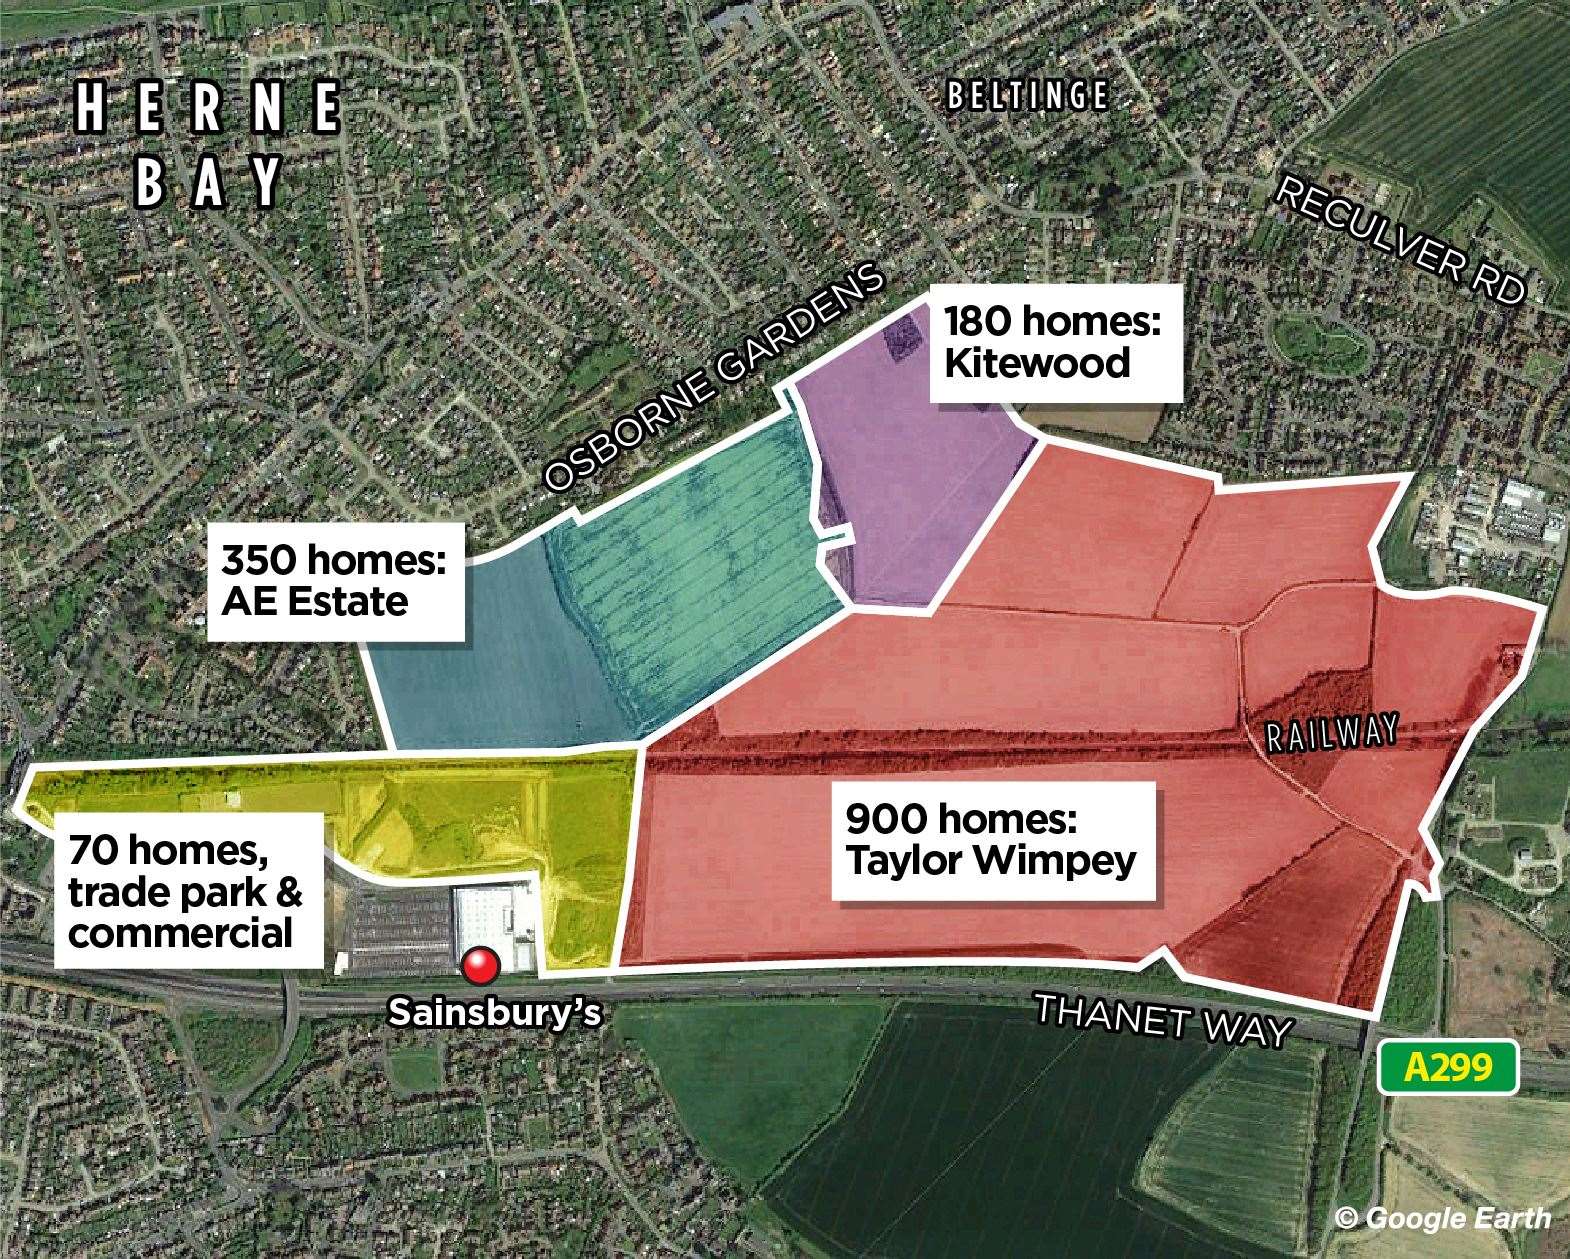 A graphic showing the various planned developments on the outskirts of Herne Bay